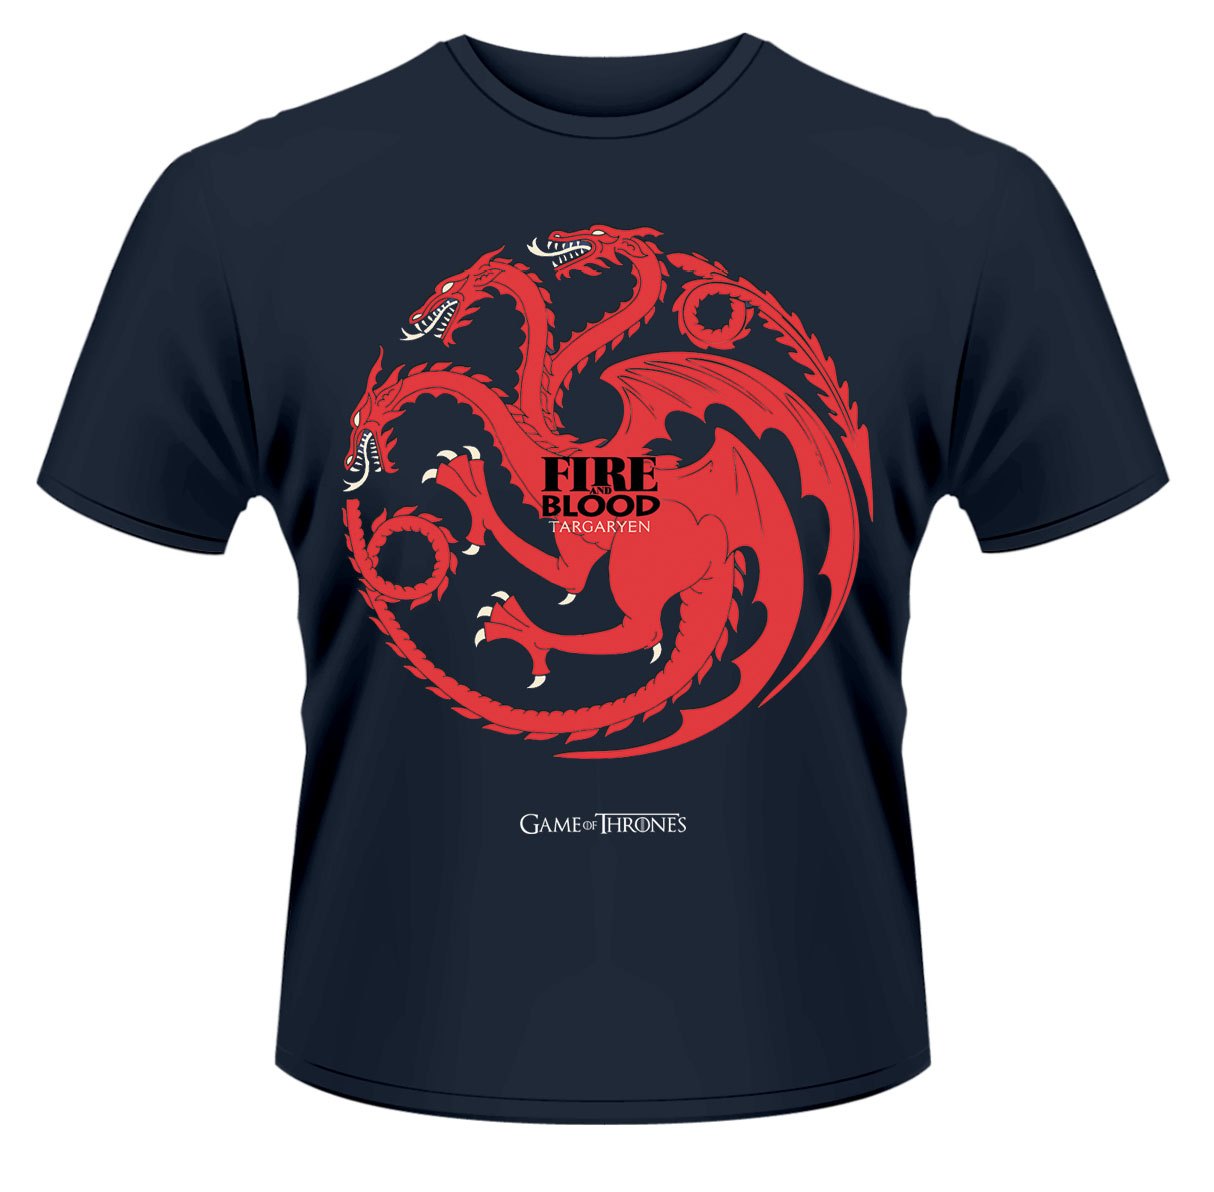 Game of Thrones T-Shirt Fire and Blood size L